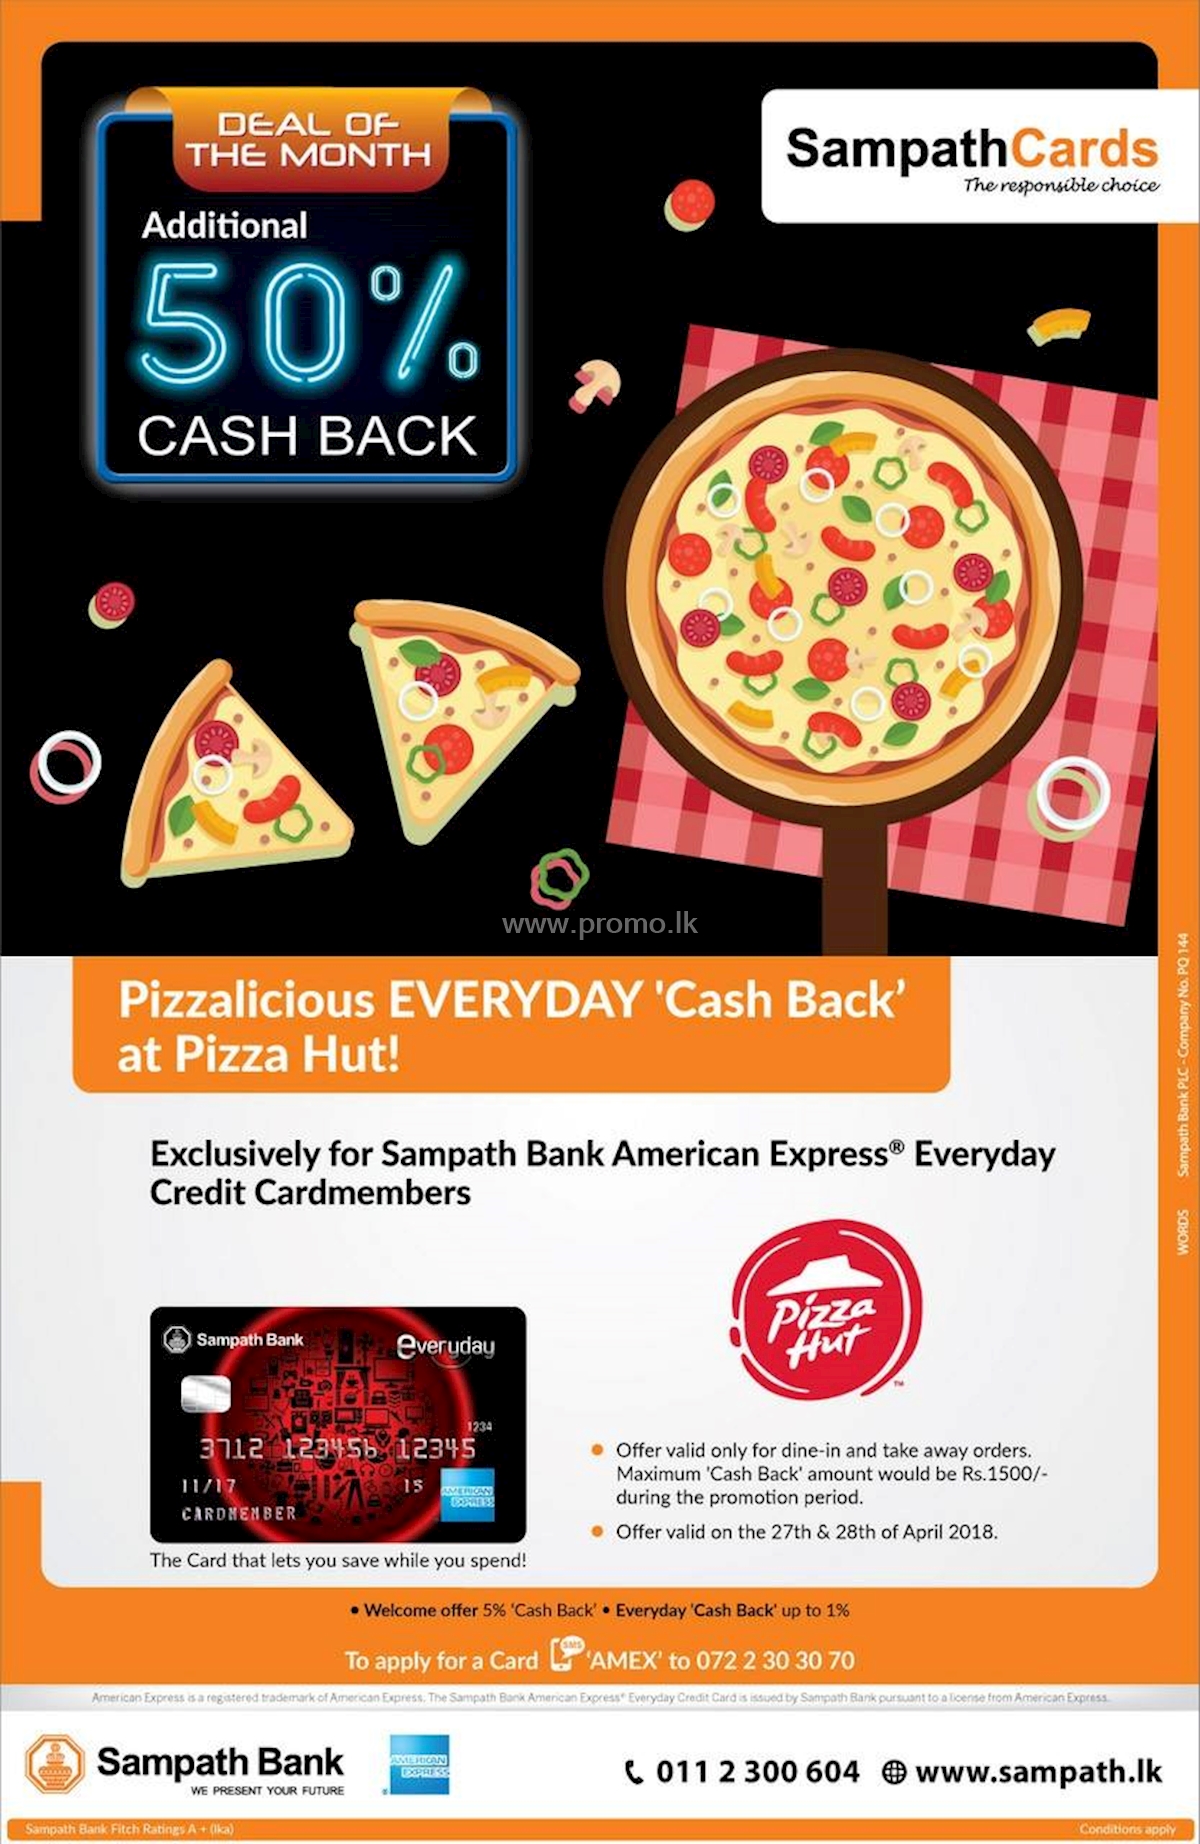 50 Cash Back At All Pizza Hut Outlets Exclusively For Sampath Bank American Express Everyday Credit Card Members